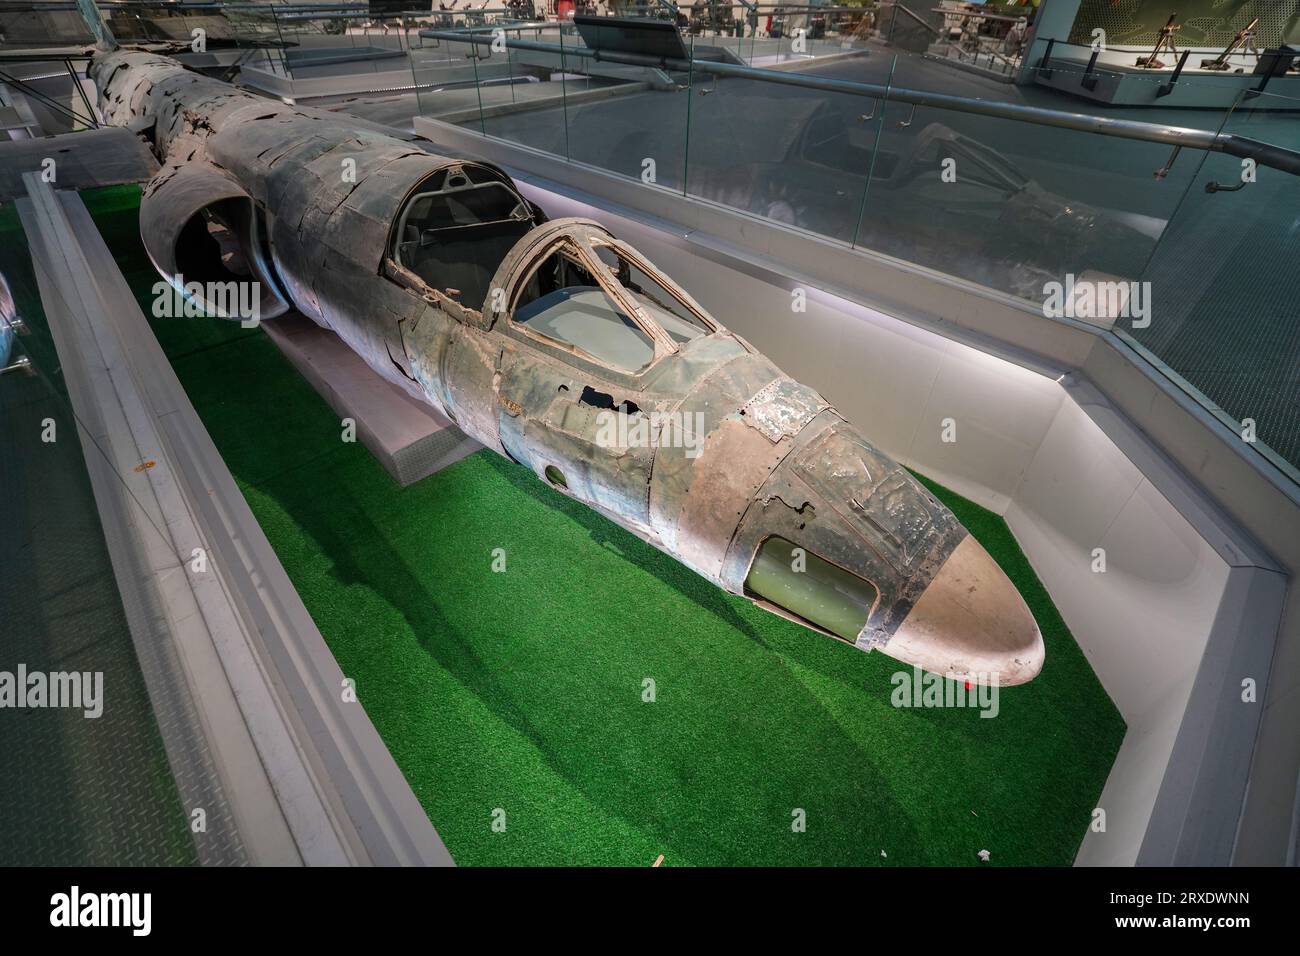 Beijing China, January 24, 2023: The wreckage of a US made U-2 high-altitude reconnaissance aircraft, Military Museum of the Chinese People's Revoluti Stock Photo